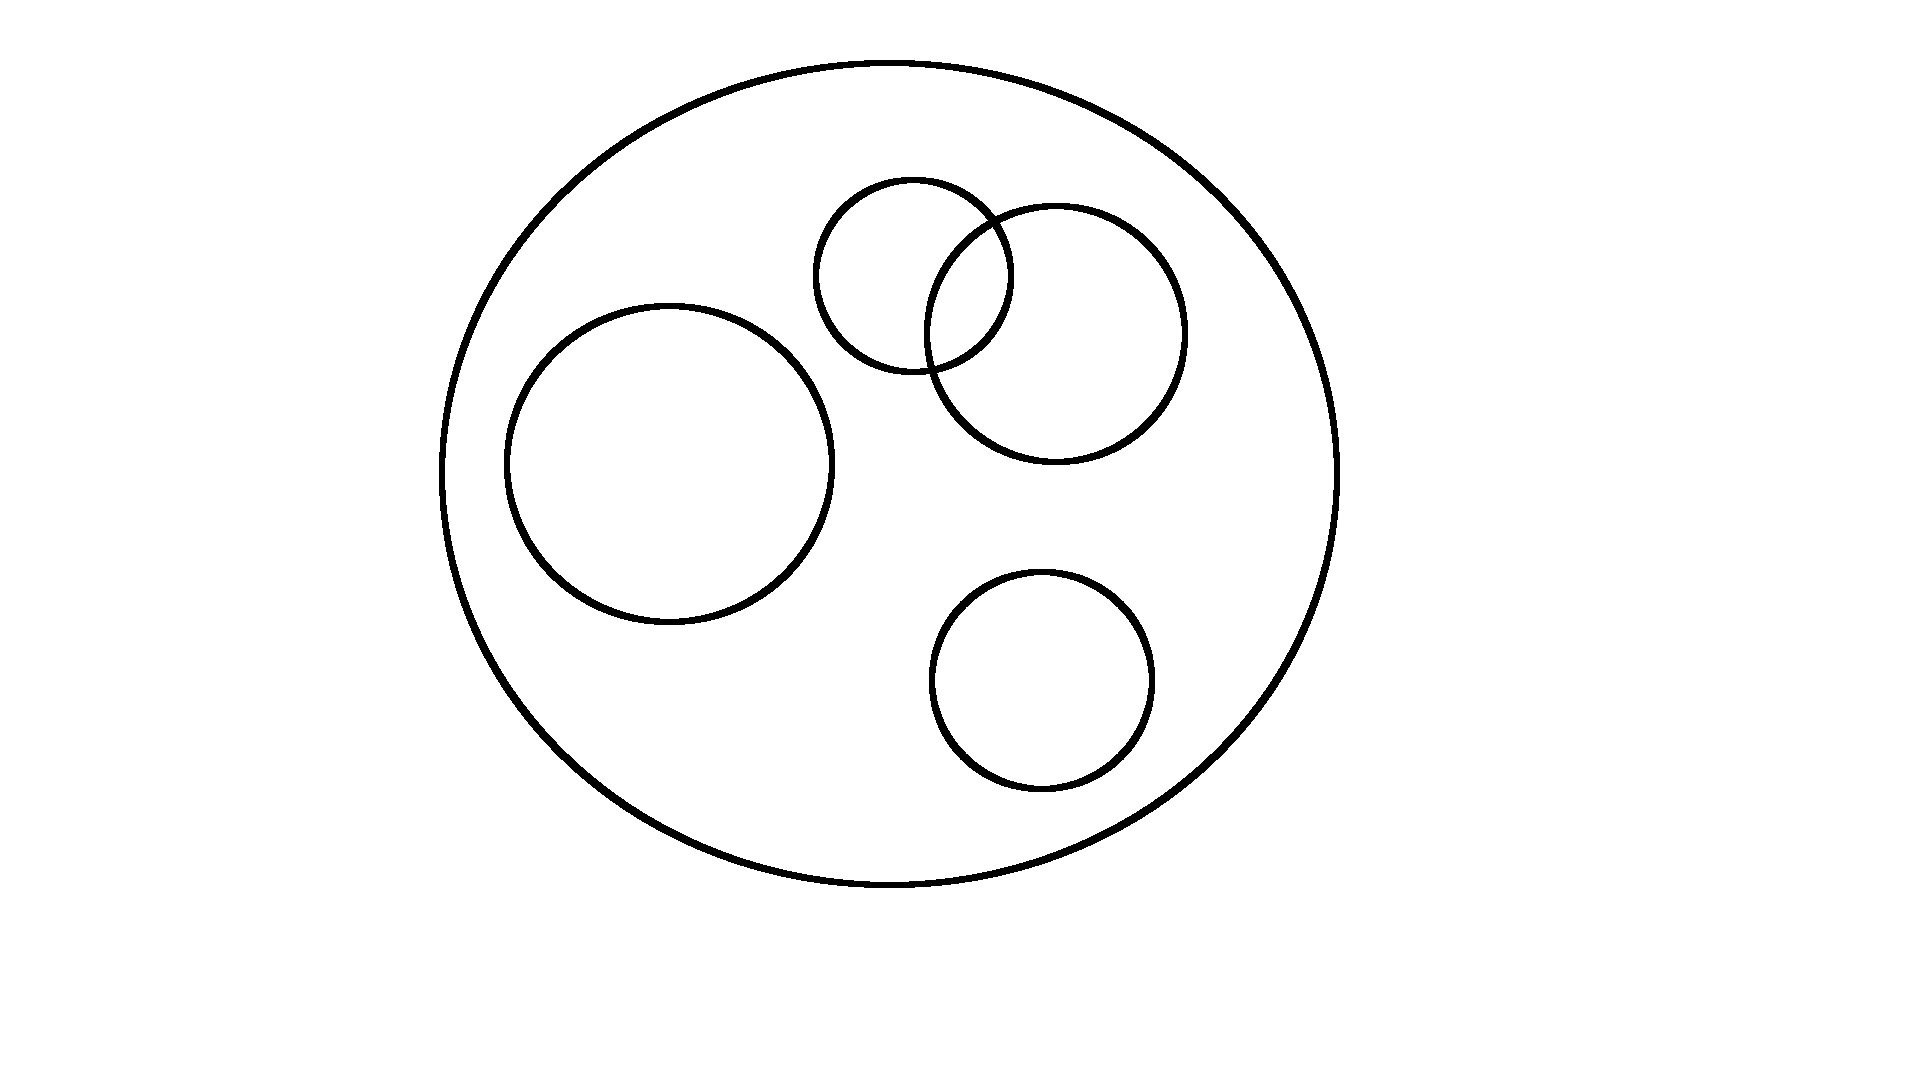 Venn diagram with logical relation model questions